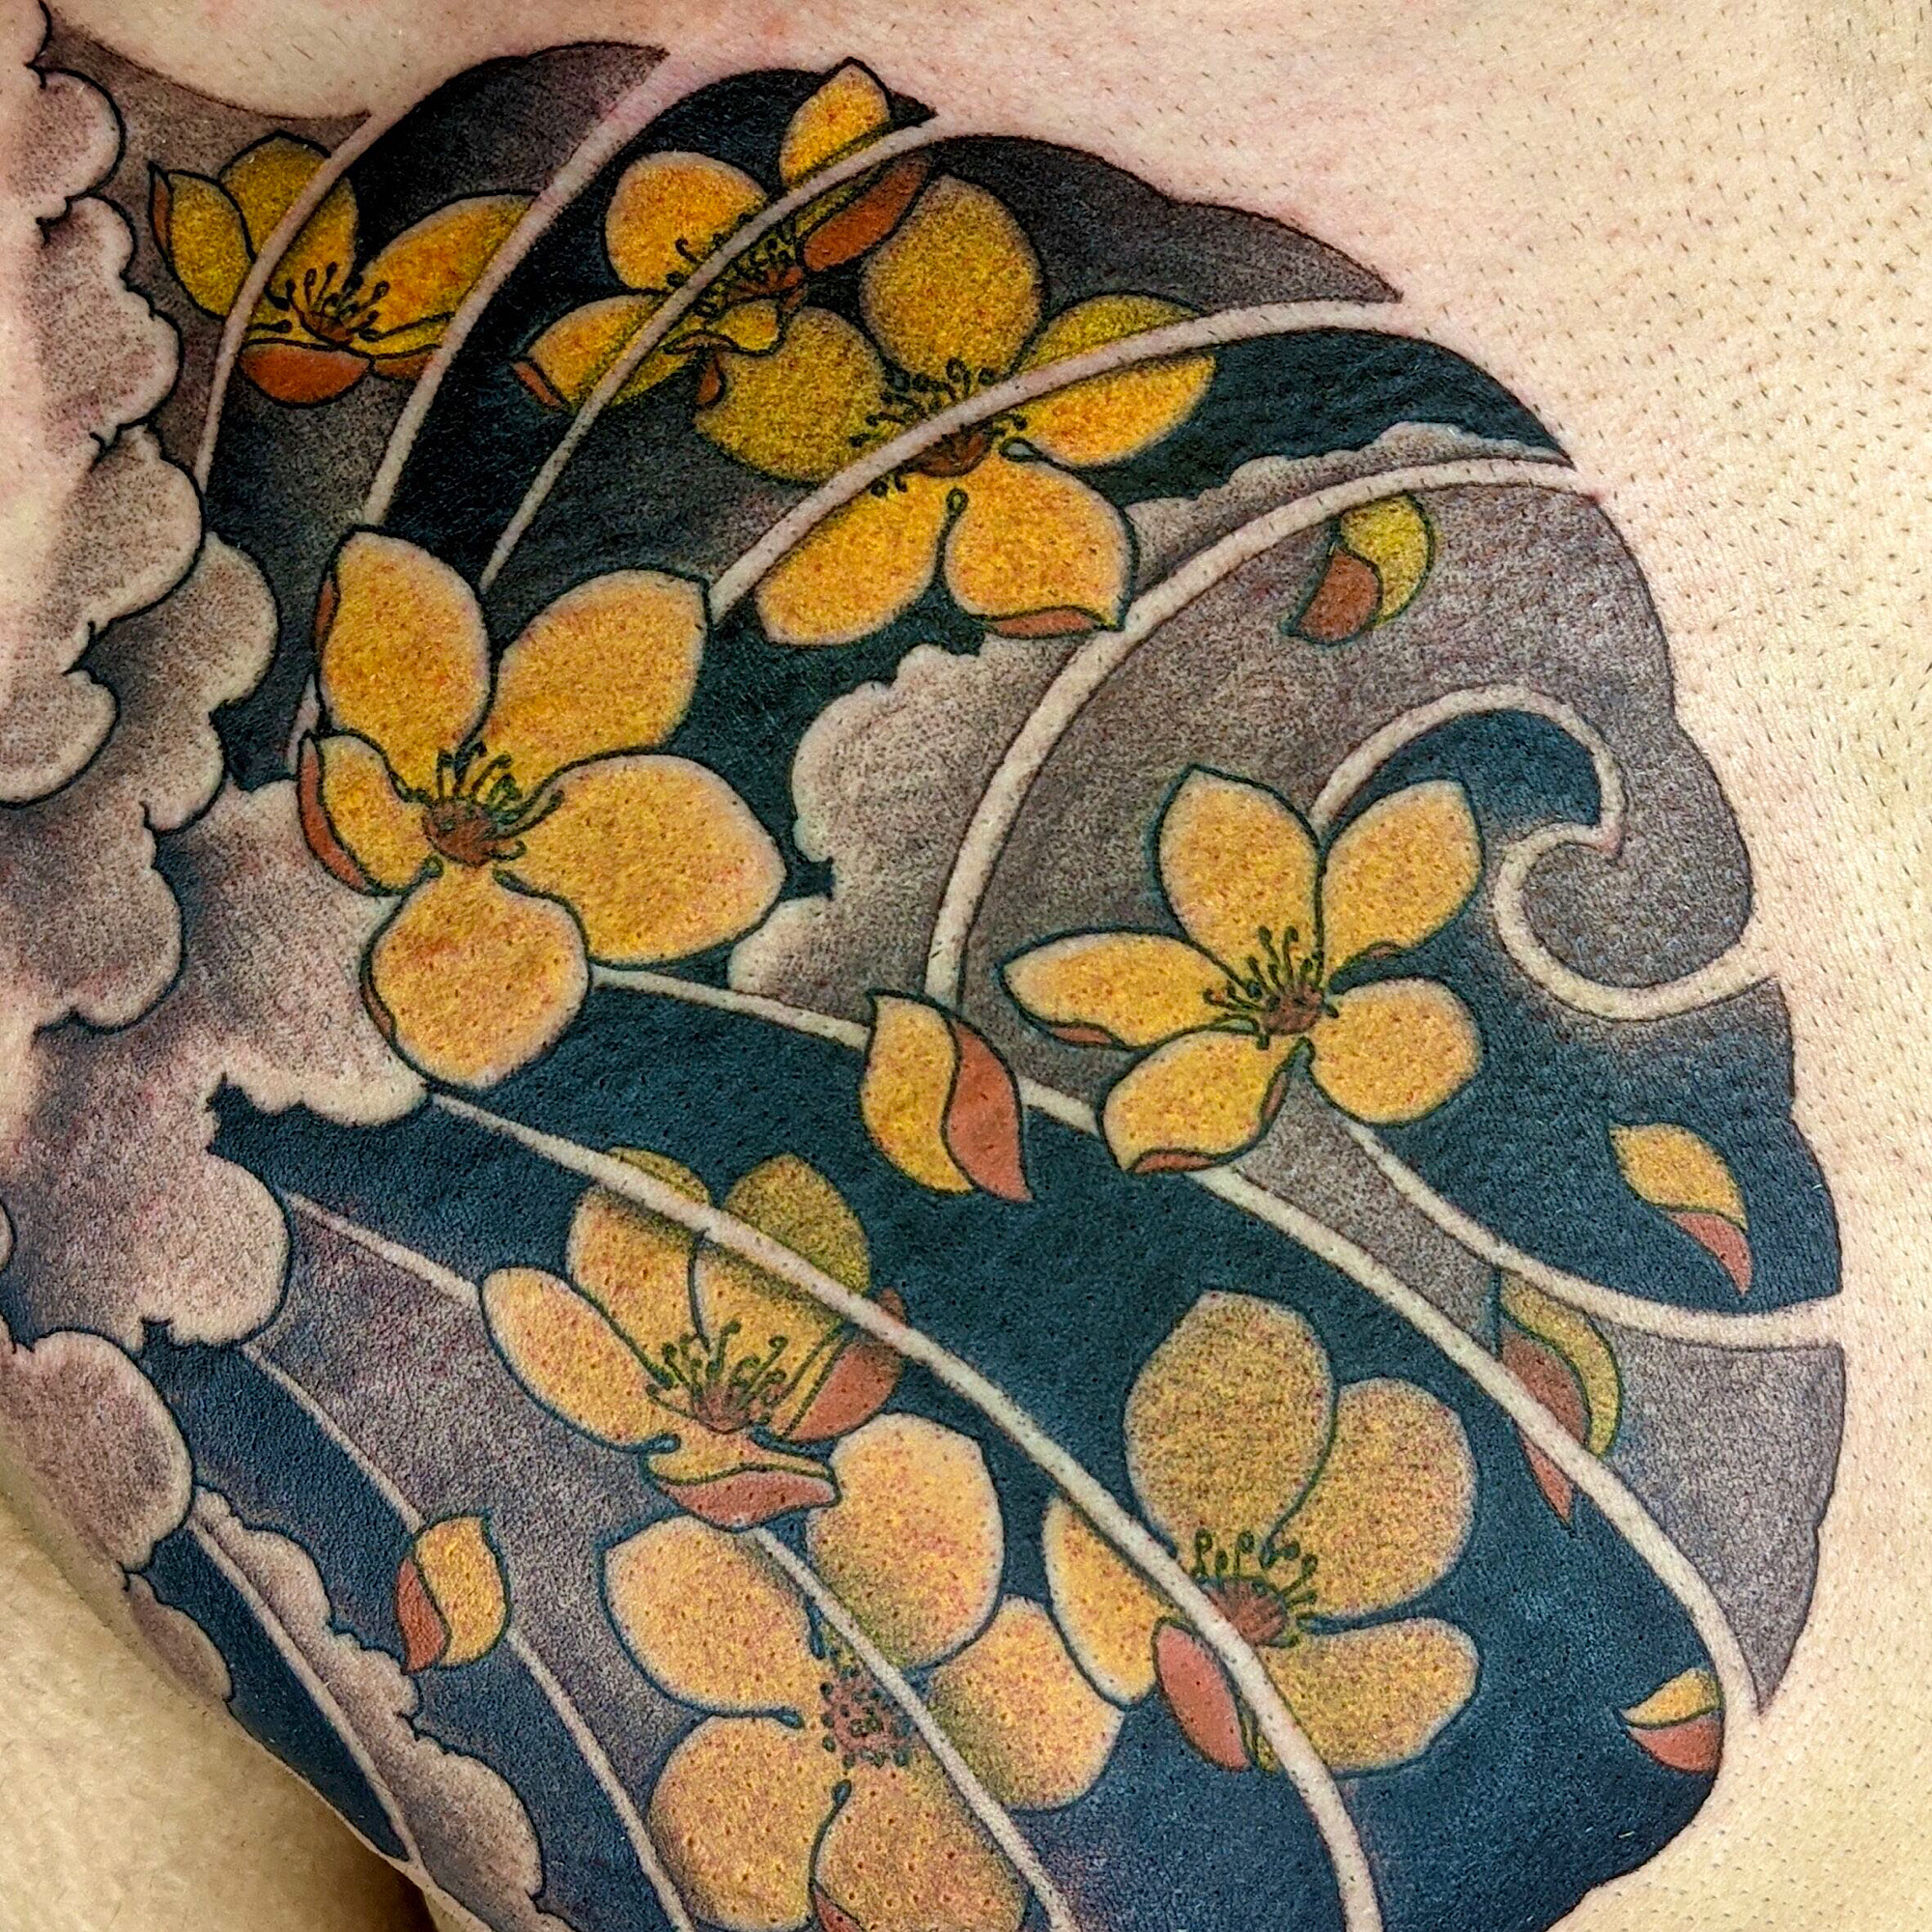 Irezumi neo traditional Japanese oriental tattoo in colour of cherry blossoms and wind bars chest plate by Ricks custom tattooing Ricardo Pedro at Nexus Collective